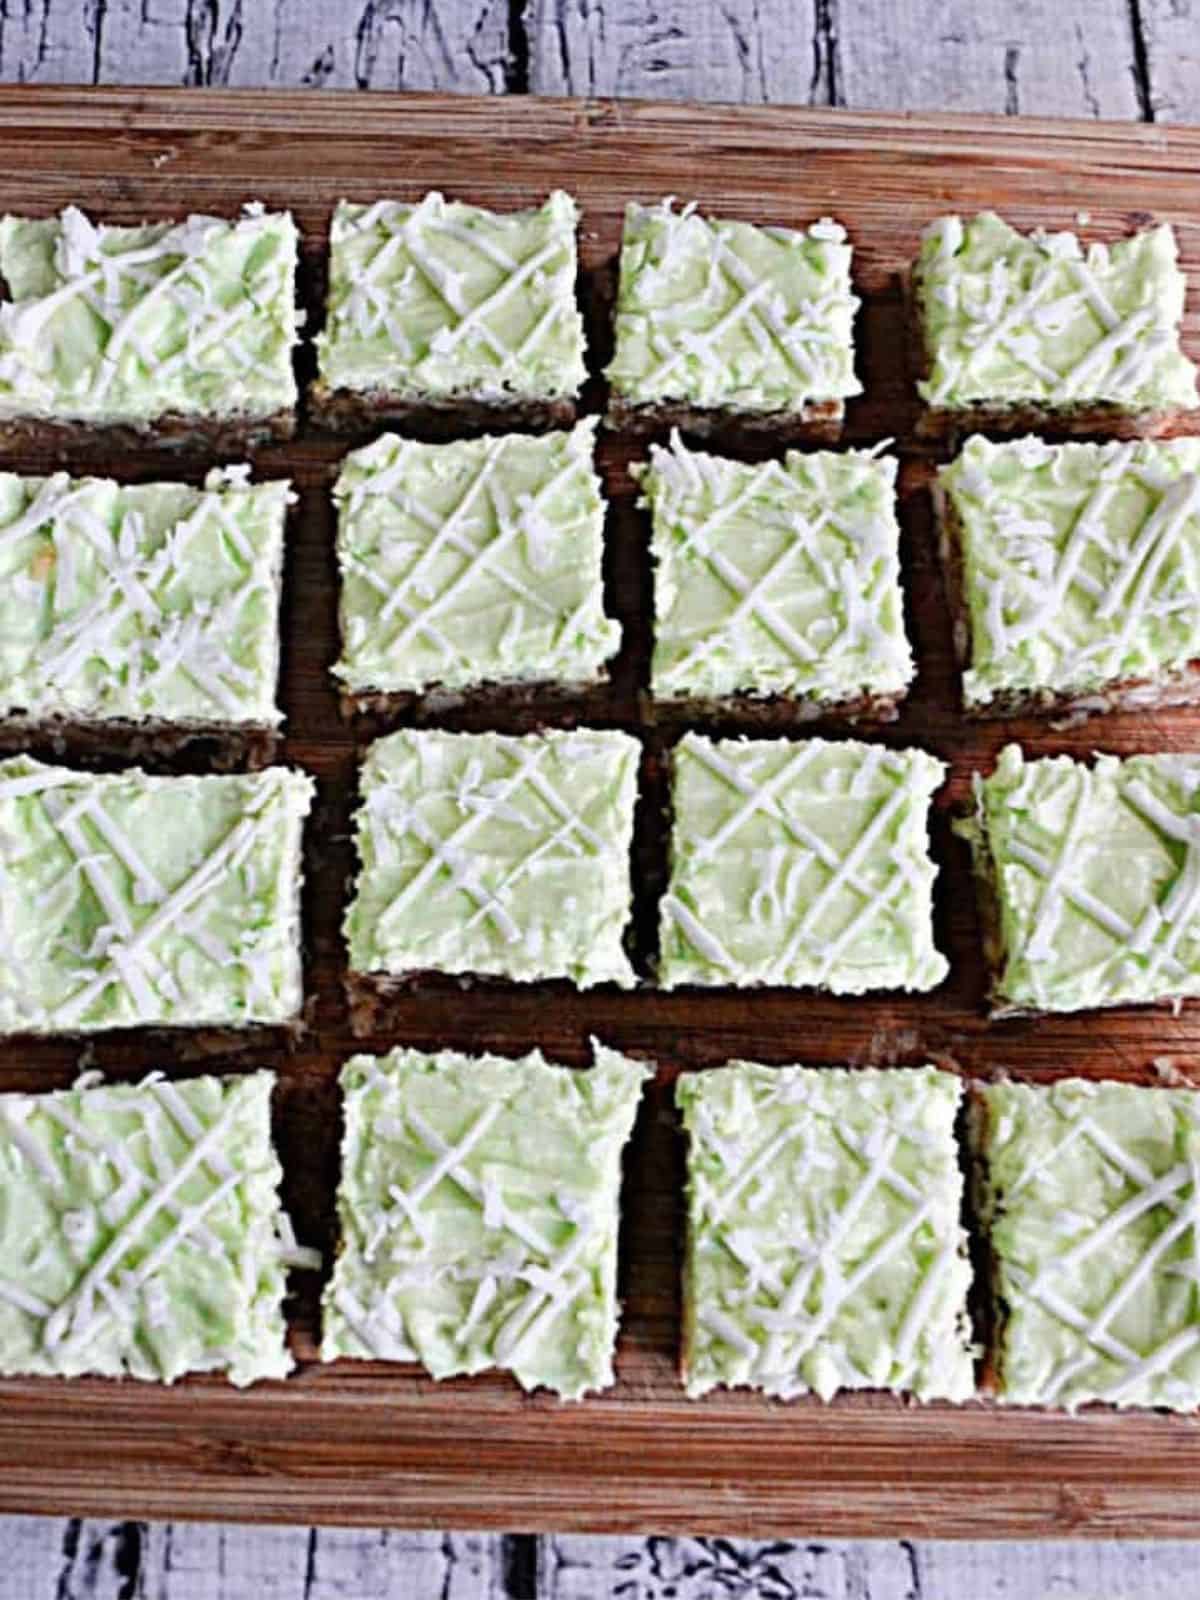 Starbucks Coconut Lime Bars on a wooden board.